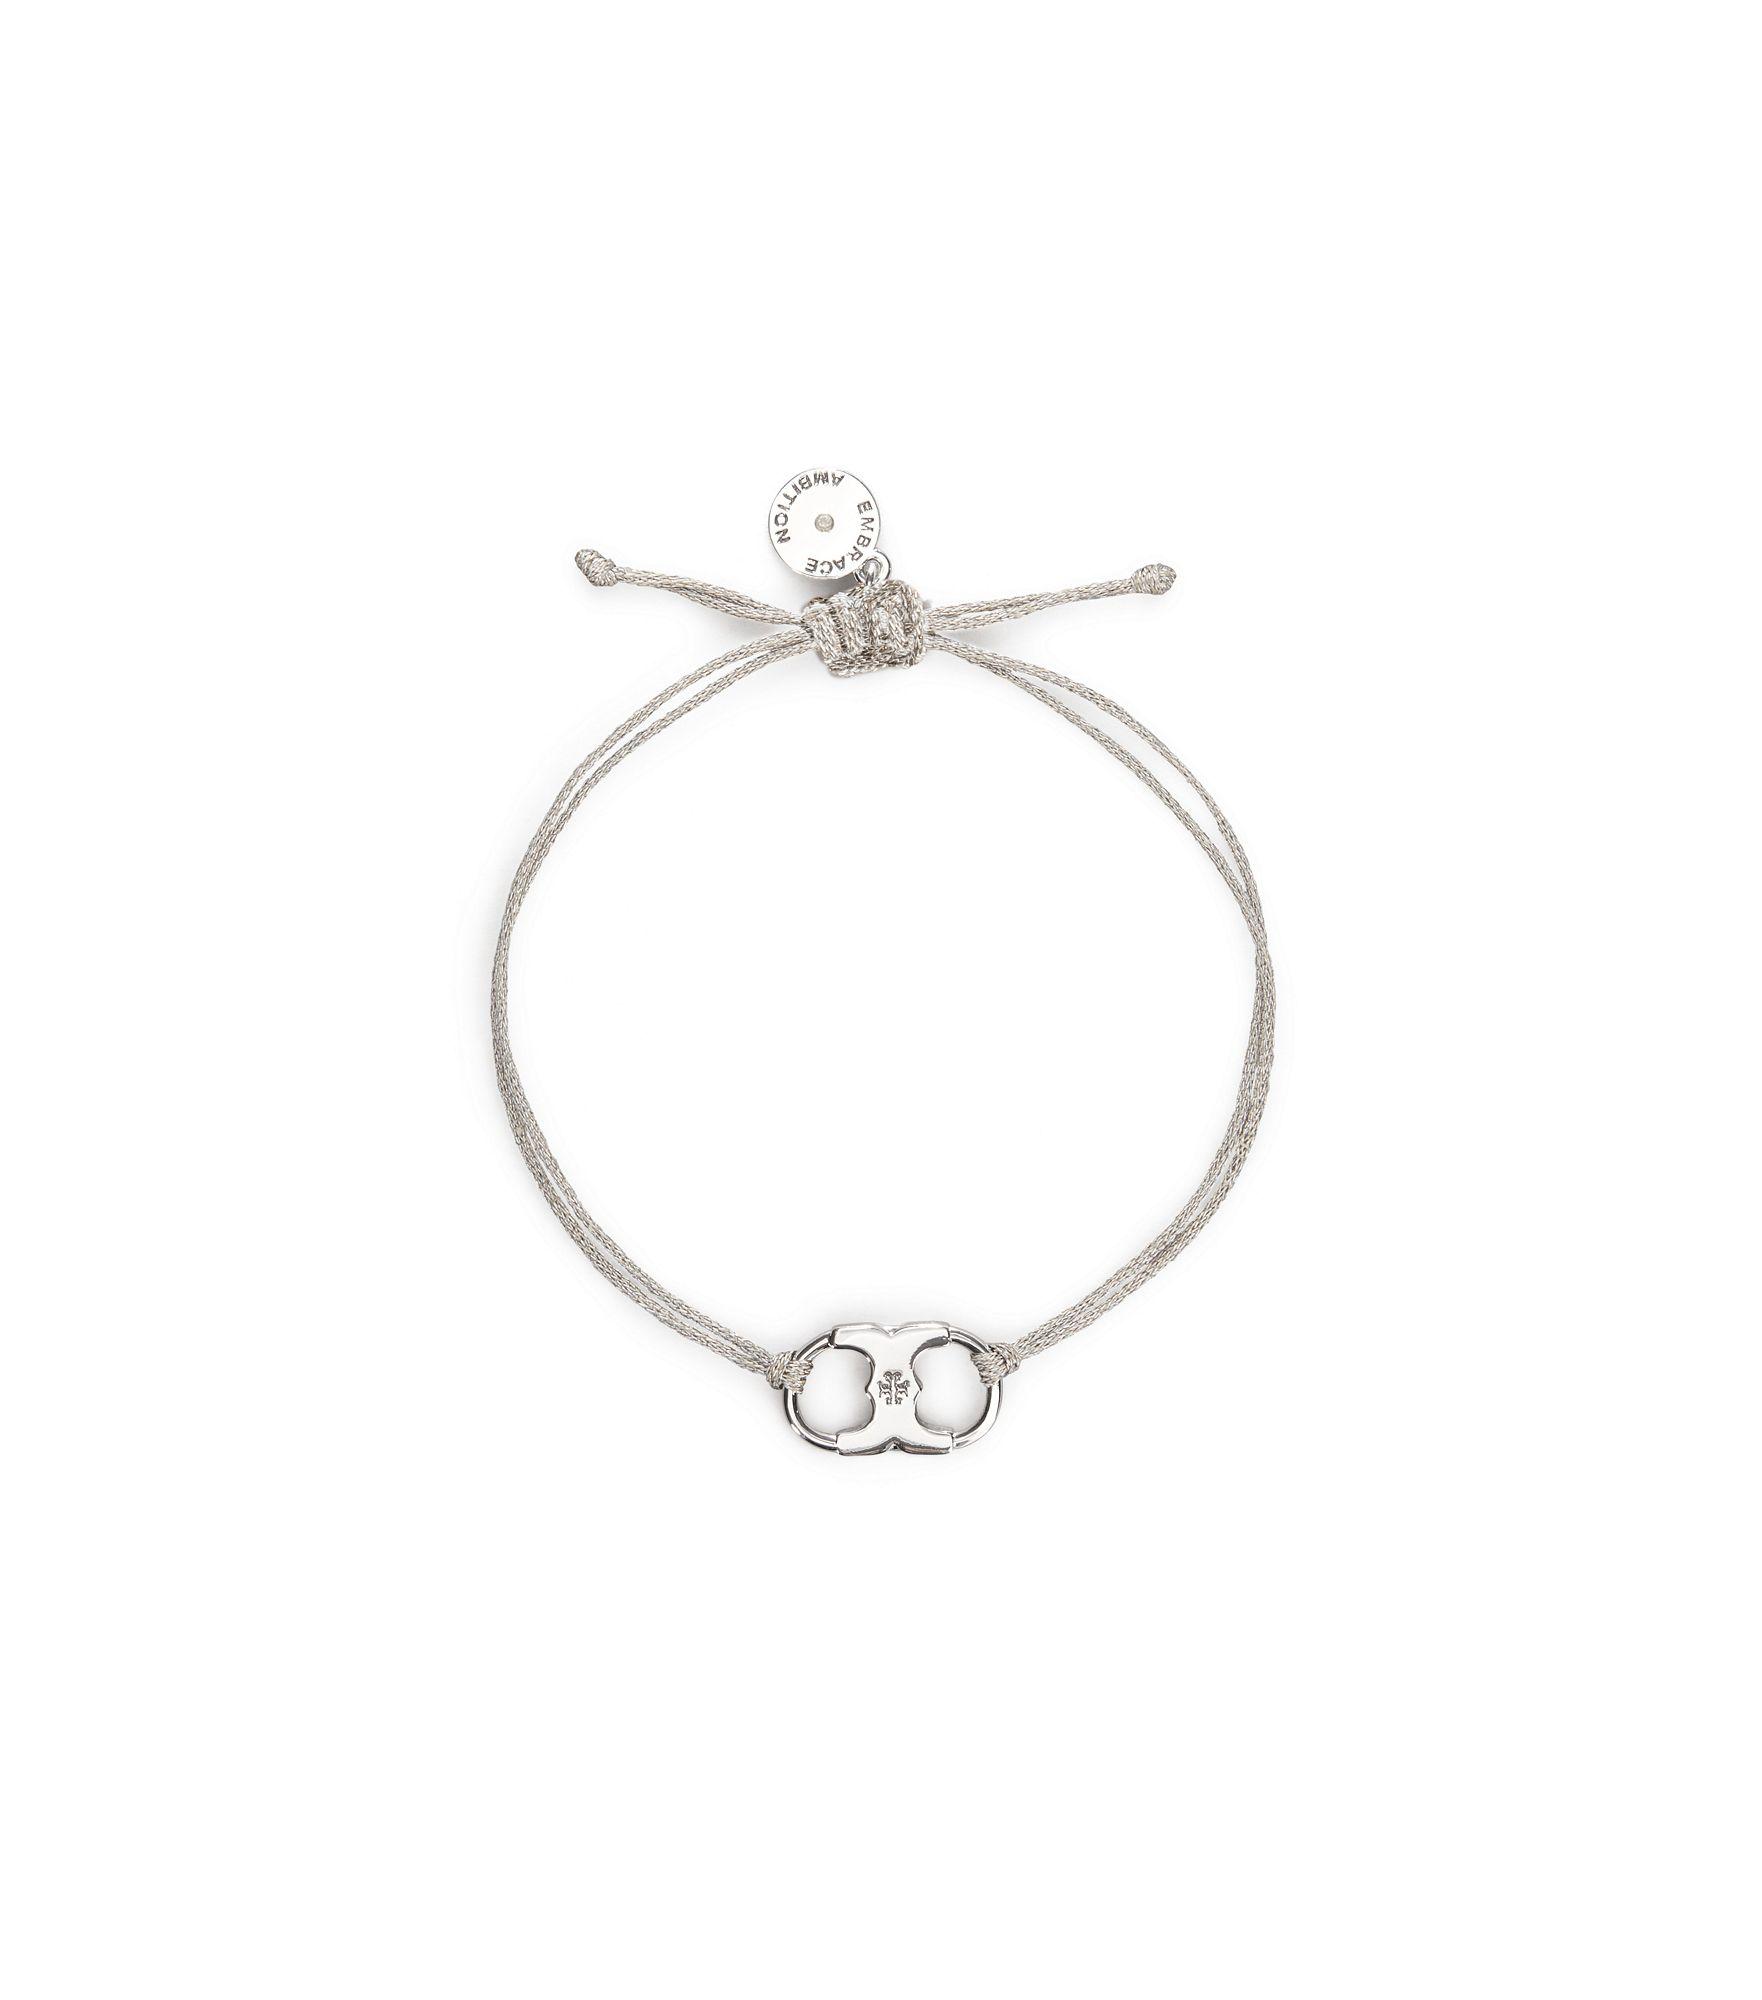 EMBRACE AMBITION BRACELET TORY BURCH : Buy Online at Best Price in KSA -  Souq is now Amazon.sa: Fashion